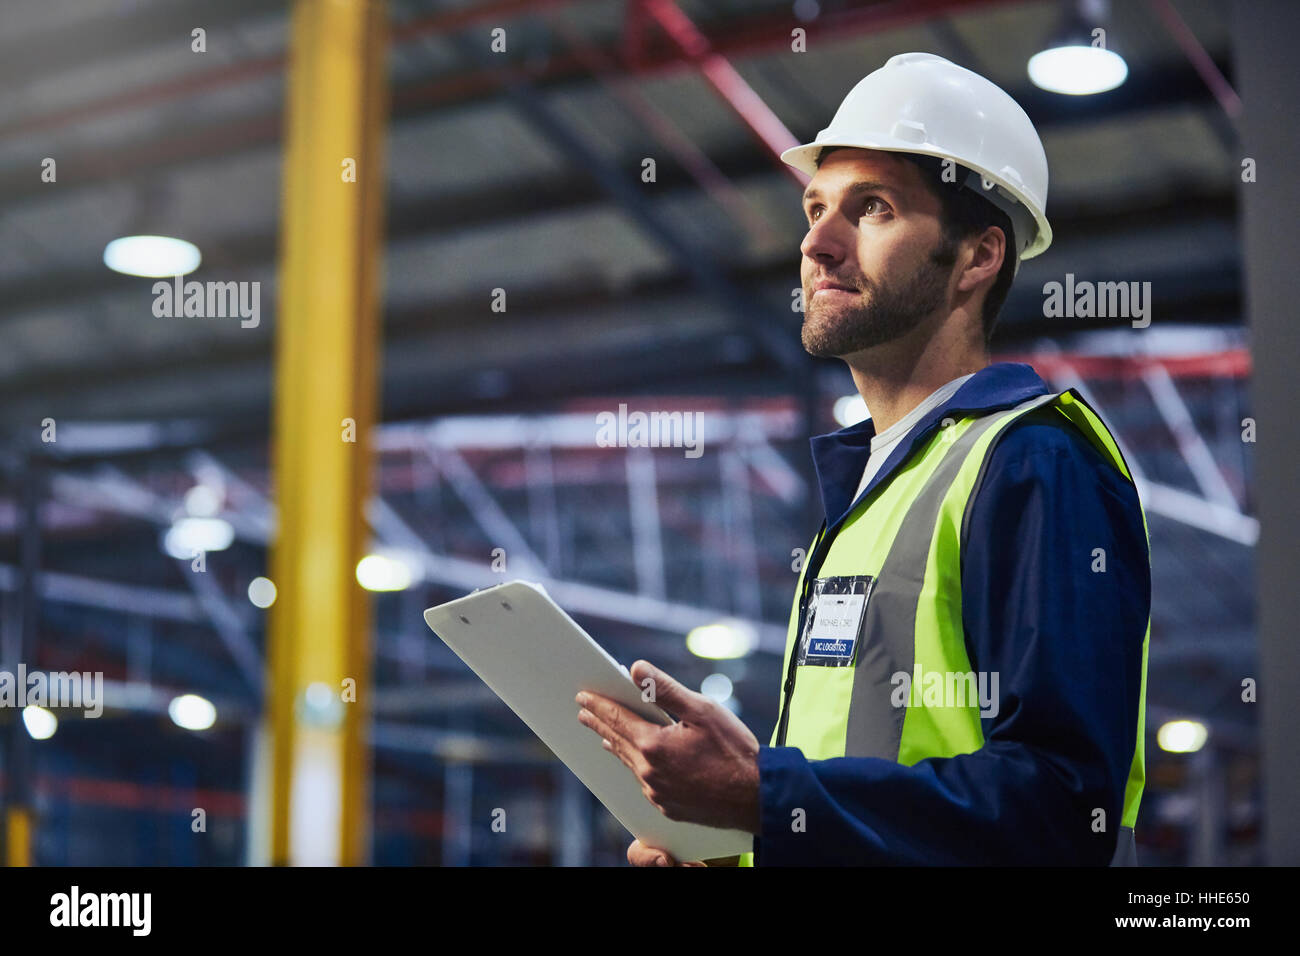 Worker with clipboard looking up in distribution warehouse Stock Photo